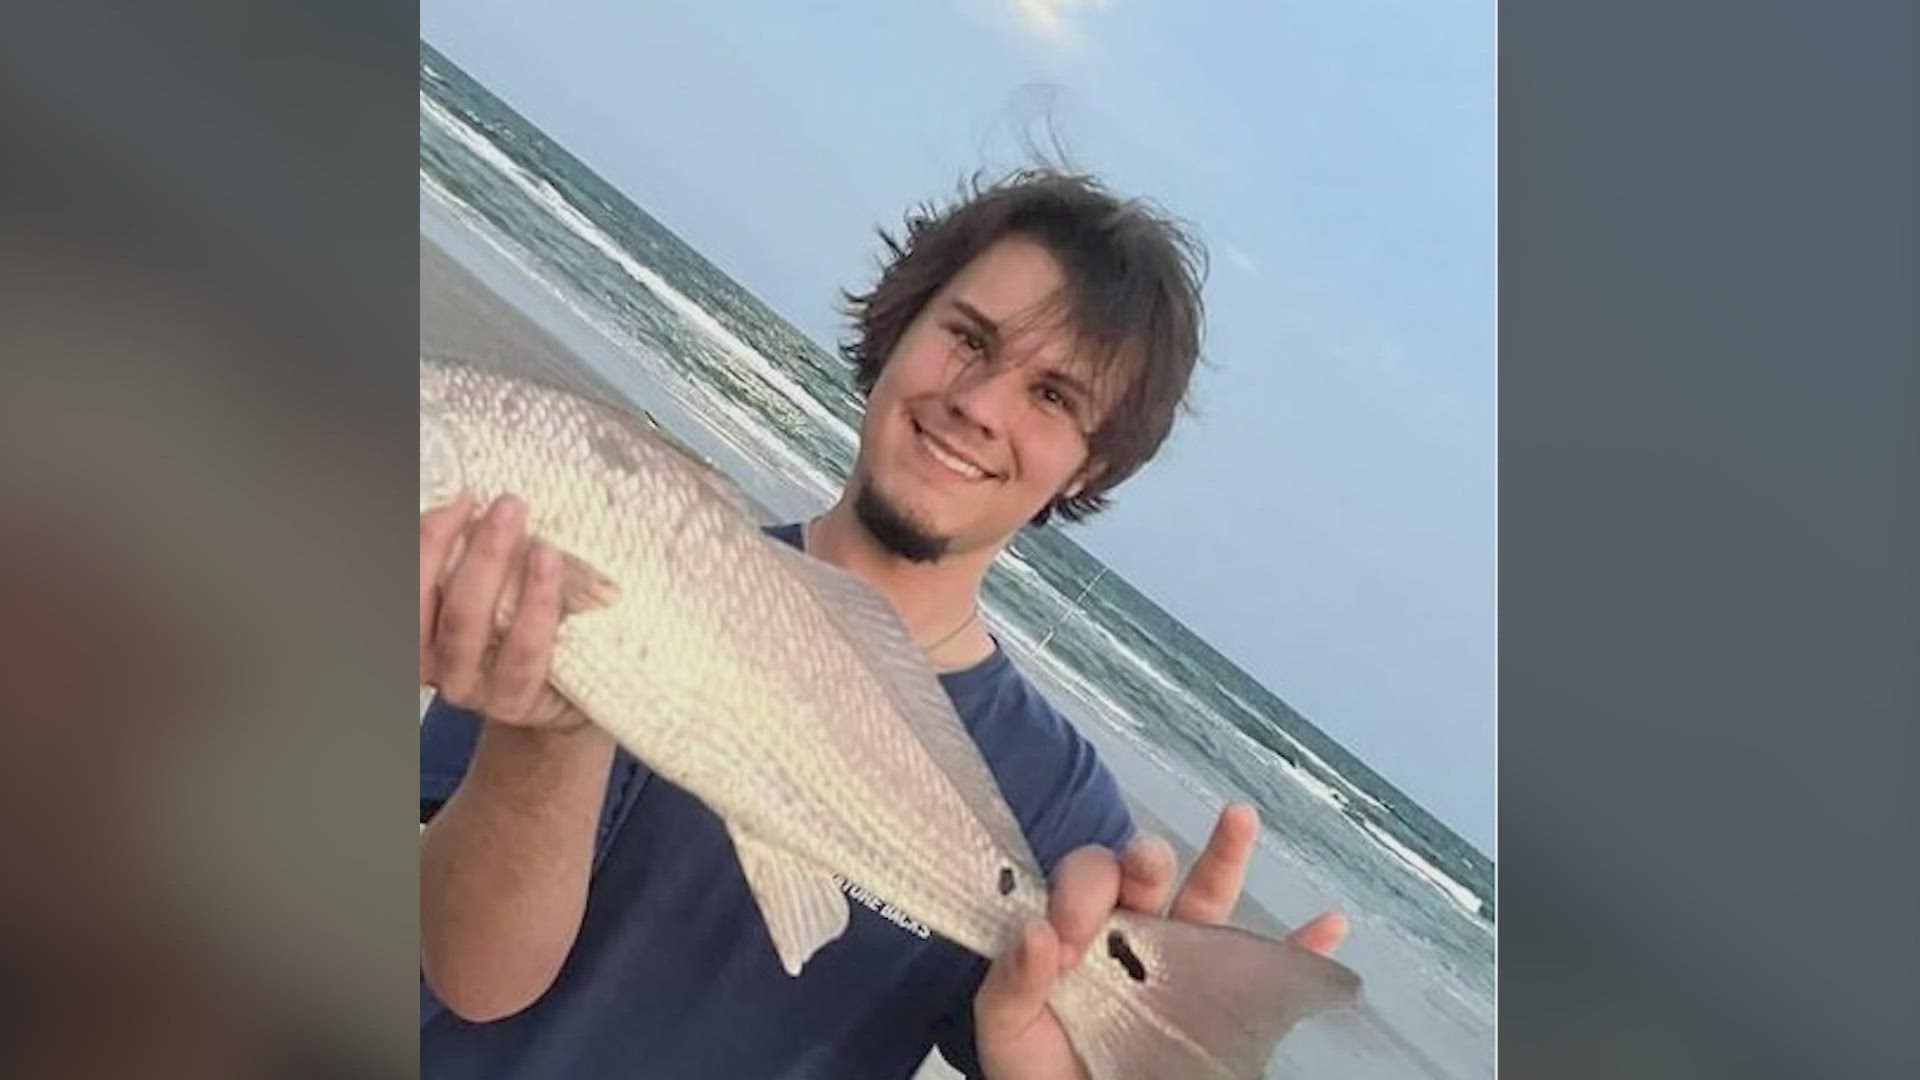 Massive search underway for missing college student from New Braunfels